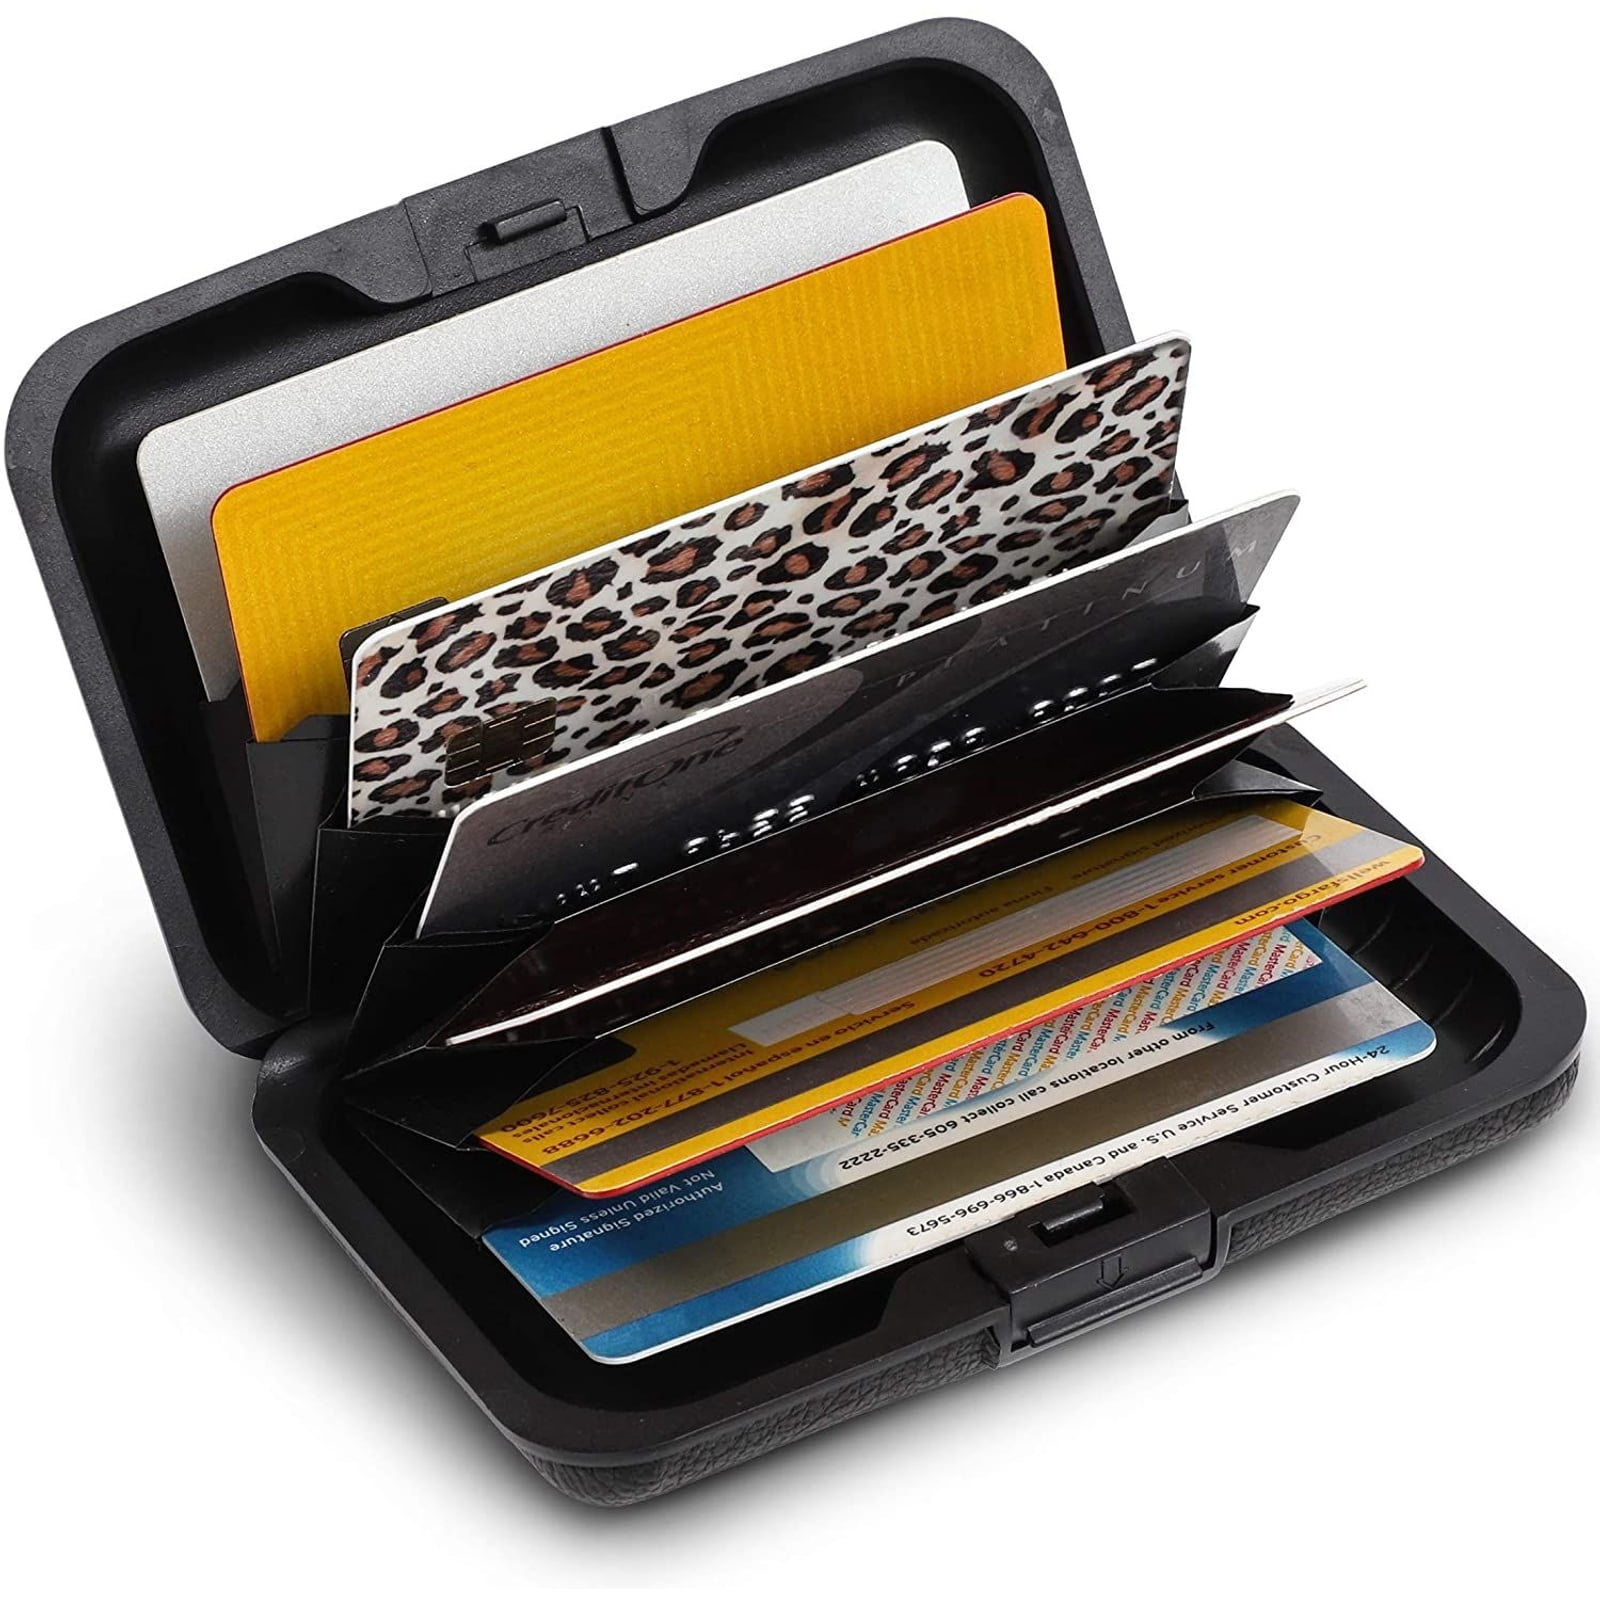 flintronic® Credit Card Holder The Selection of The Best Birthday Gift 10 Card Slots, 1 ID Window, 1 Cash Clip Black RFID Blocking Bifold Leather Purse Metal Money Clip Wallet